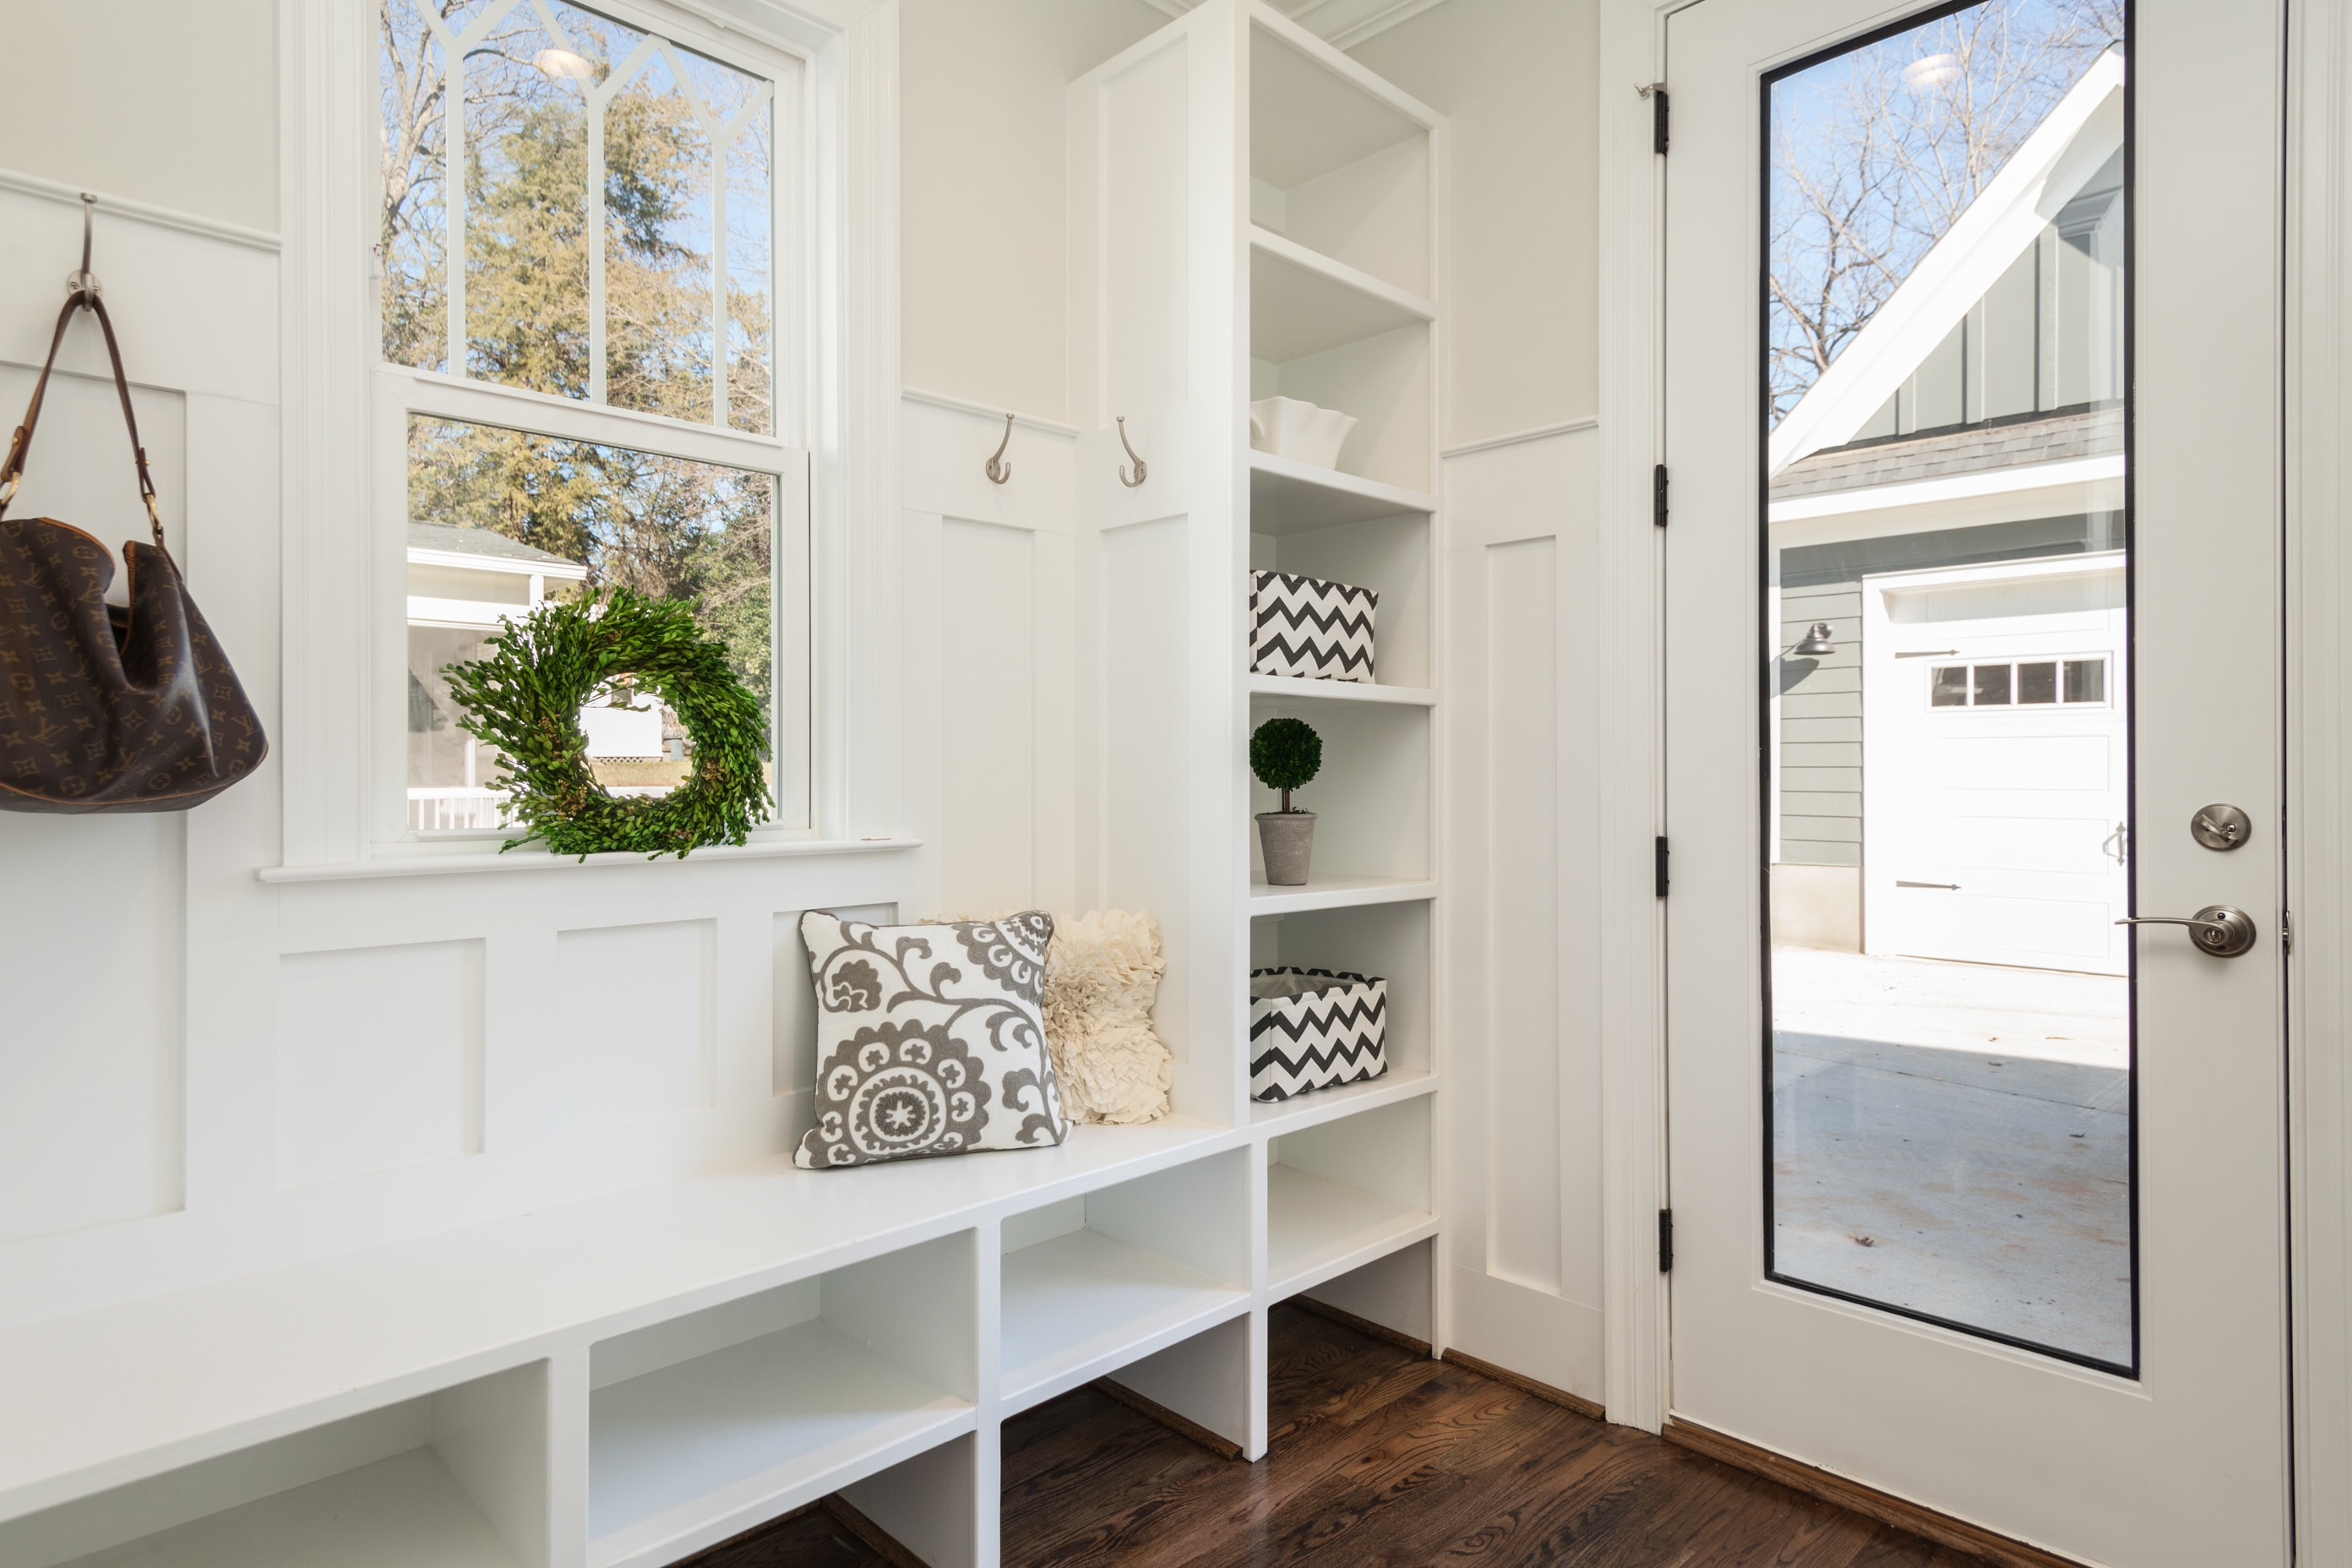 mudroom with decorative wreath and baskets